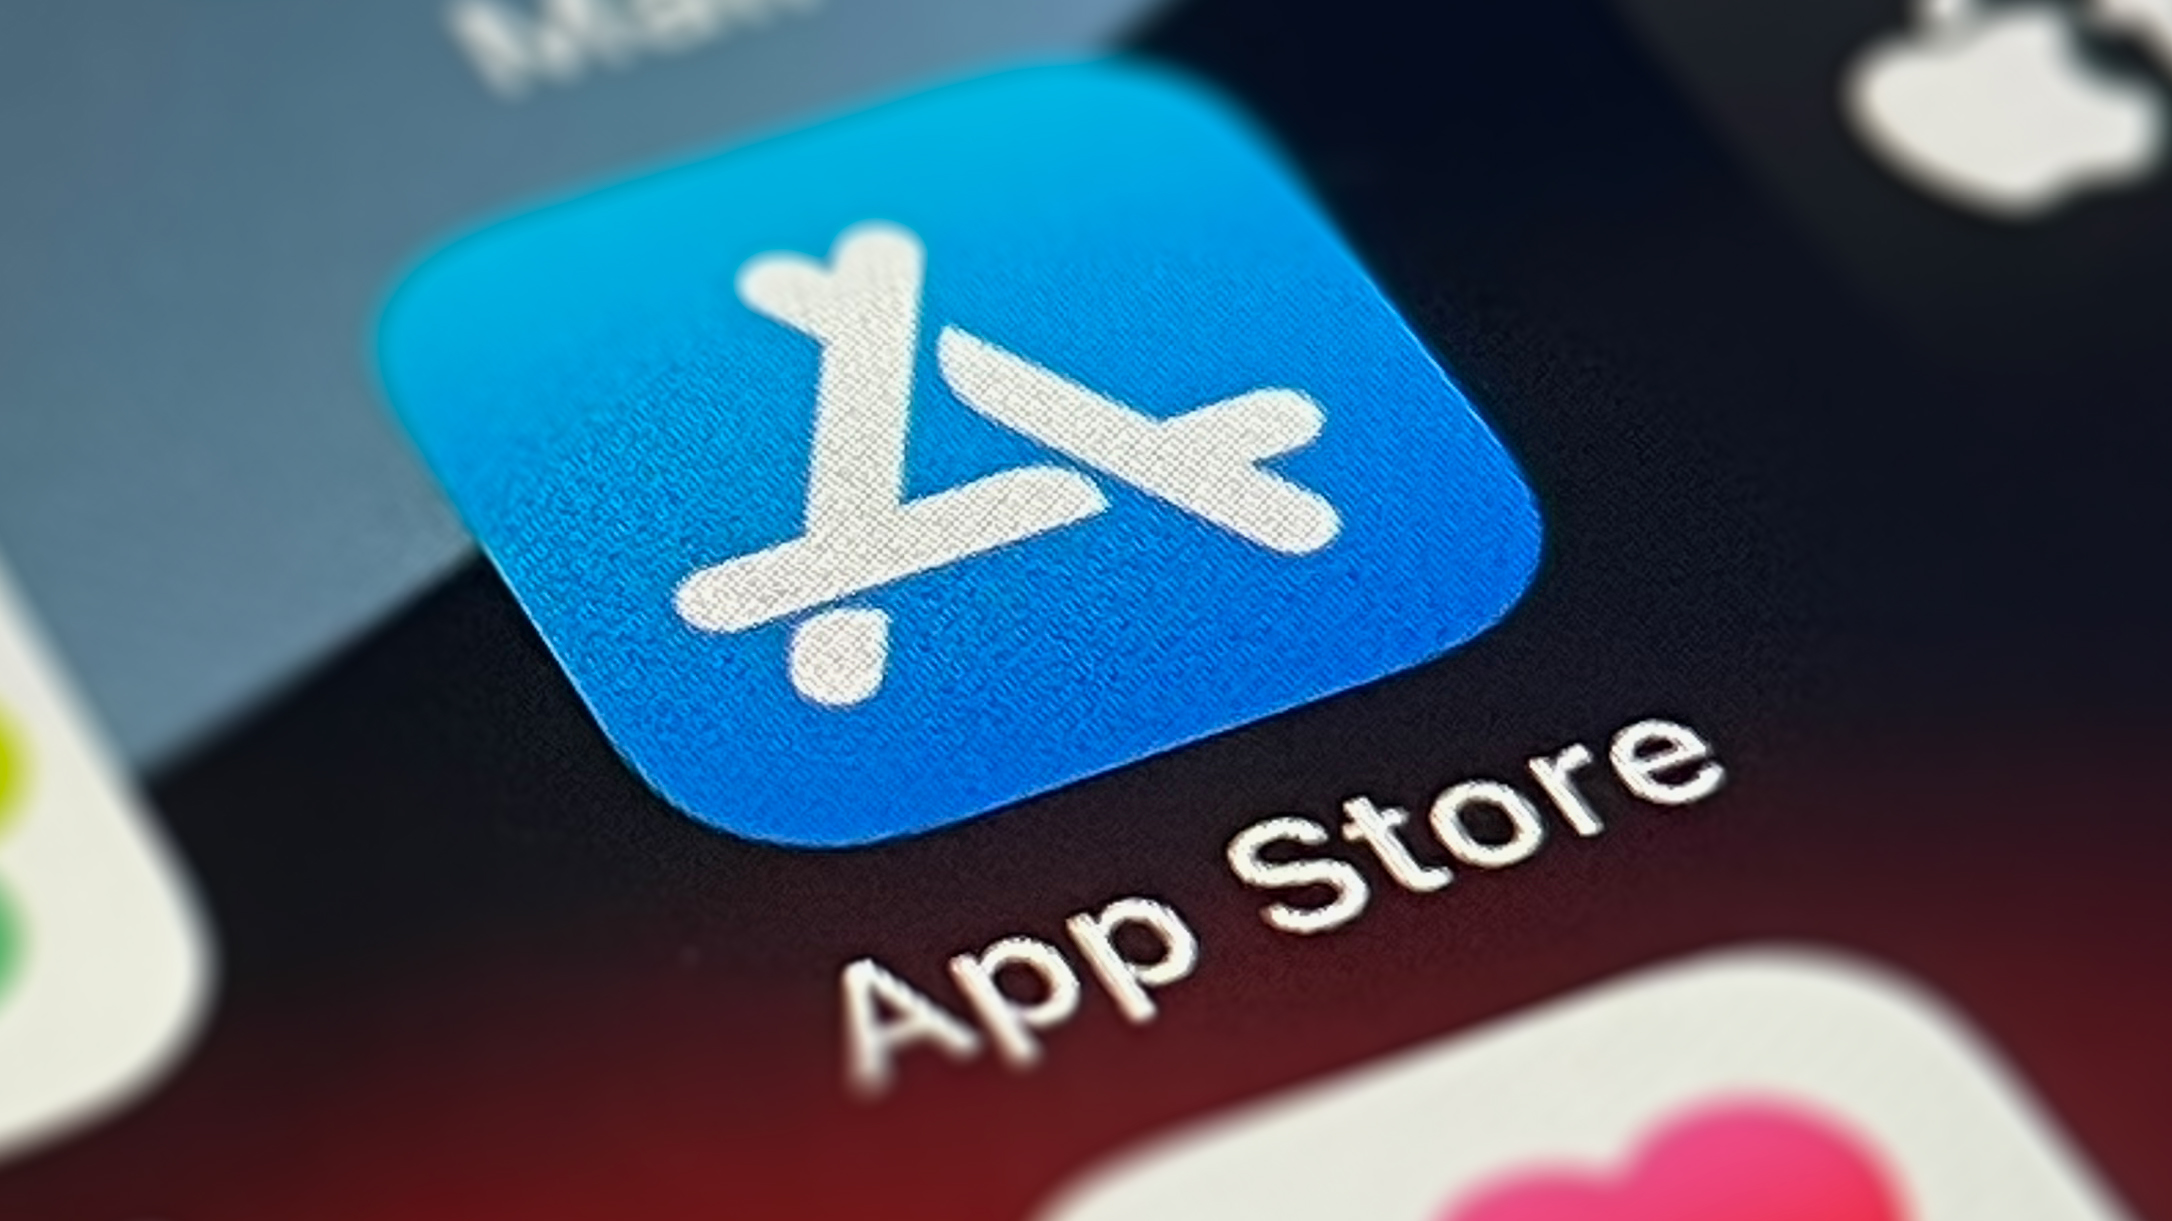 App Store icon on iPhone screen